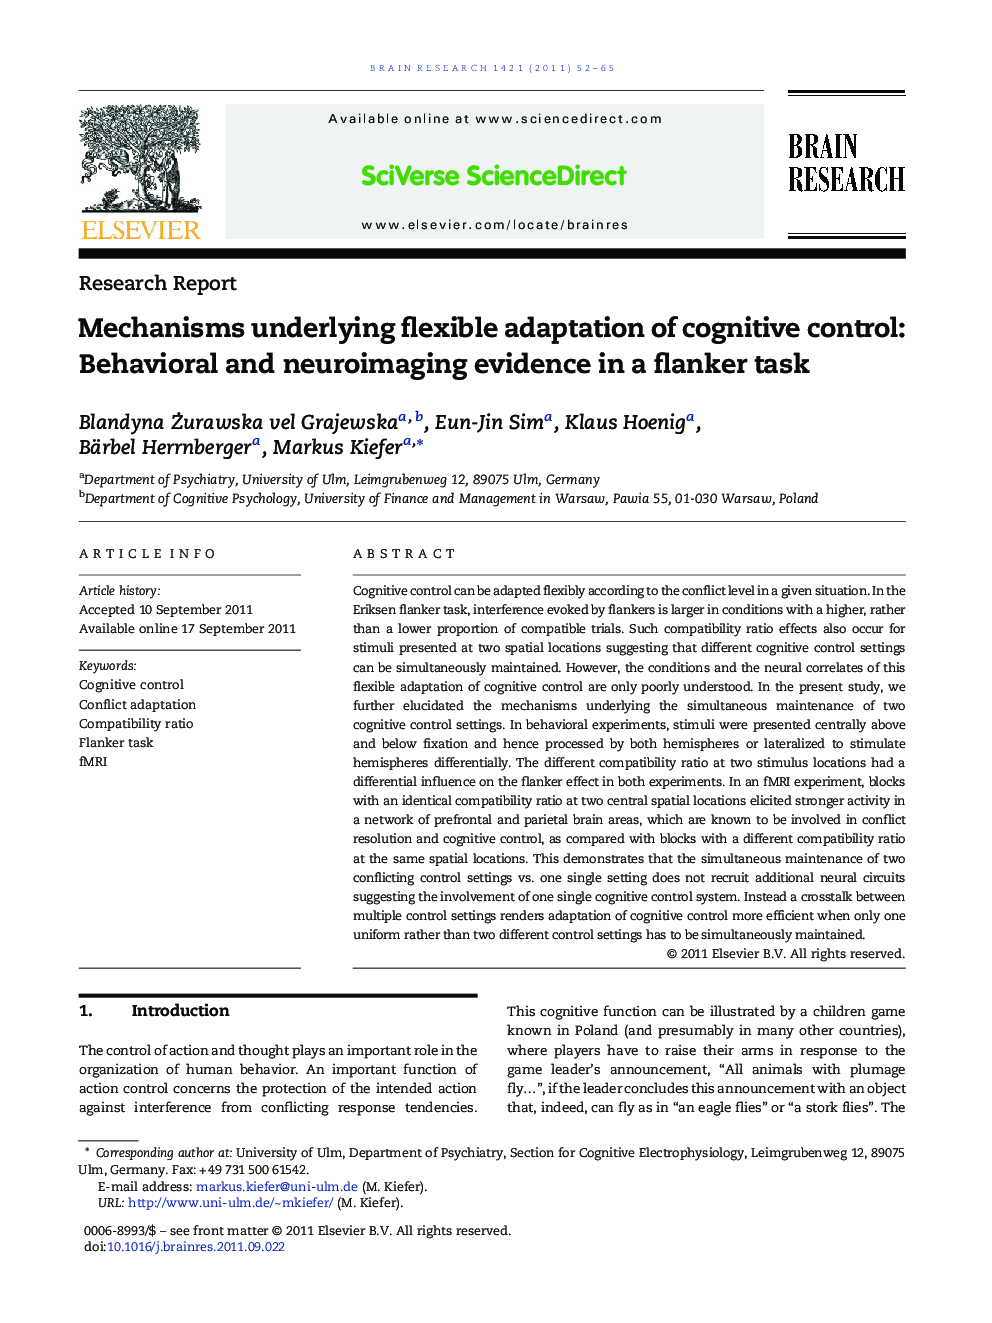 Research ReportMechanisms underlying flexible adaptation of cognitive control: Behavioral and neuroimaging evidence in a flanker task